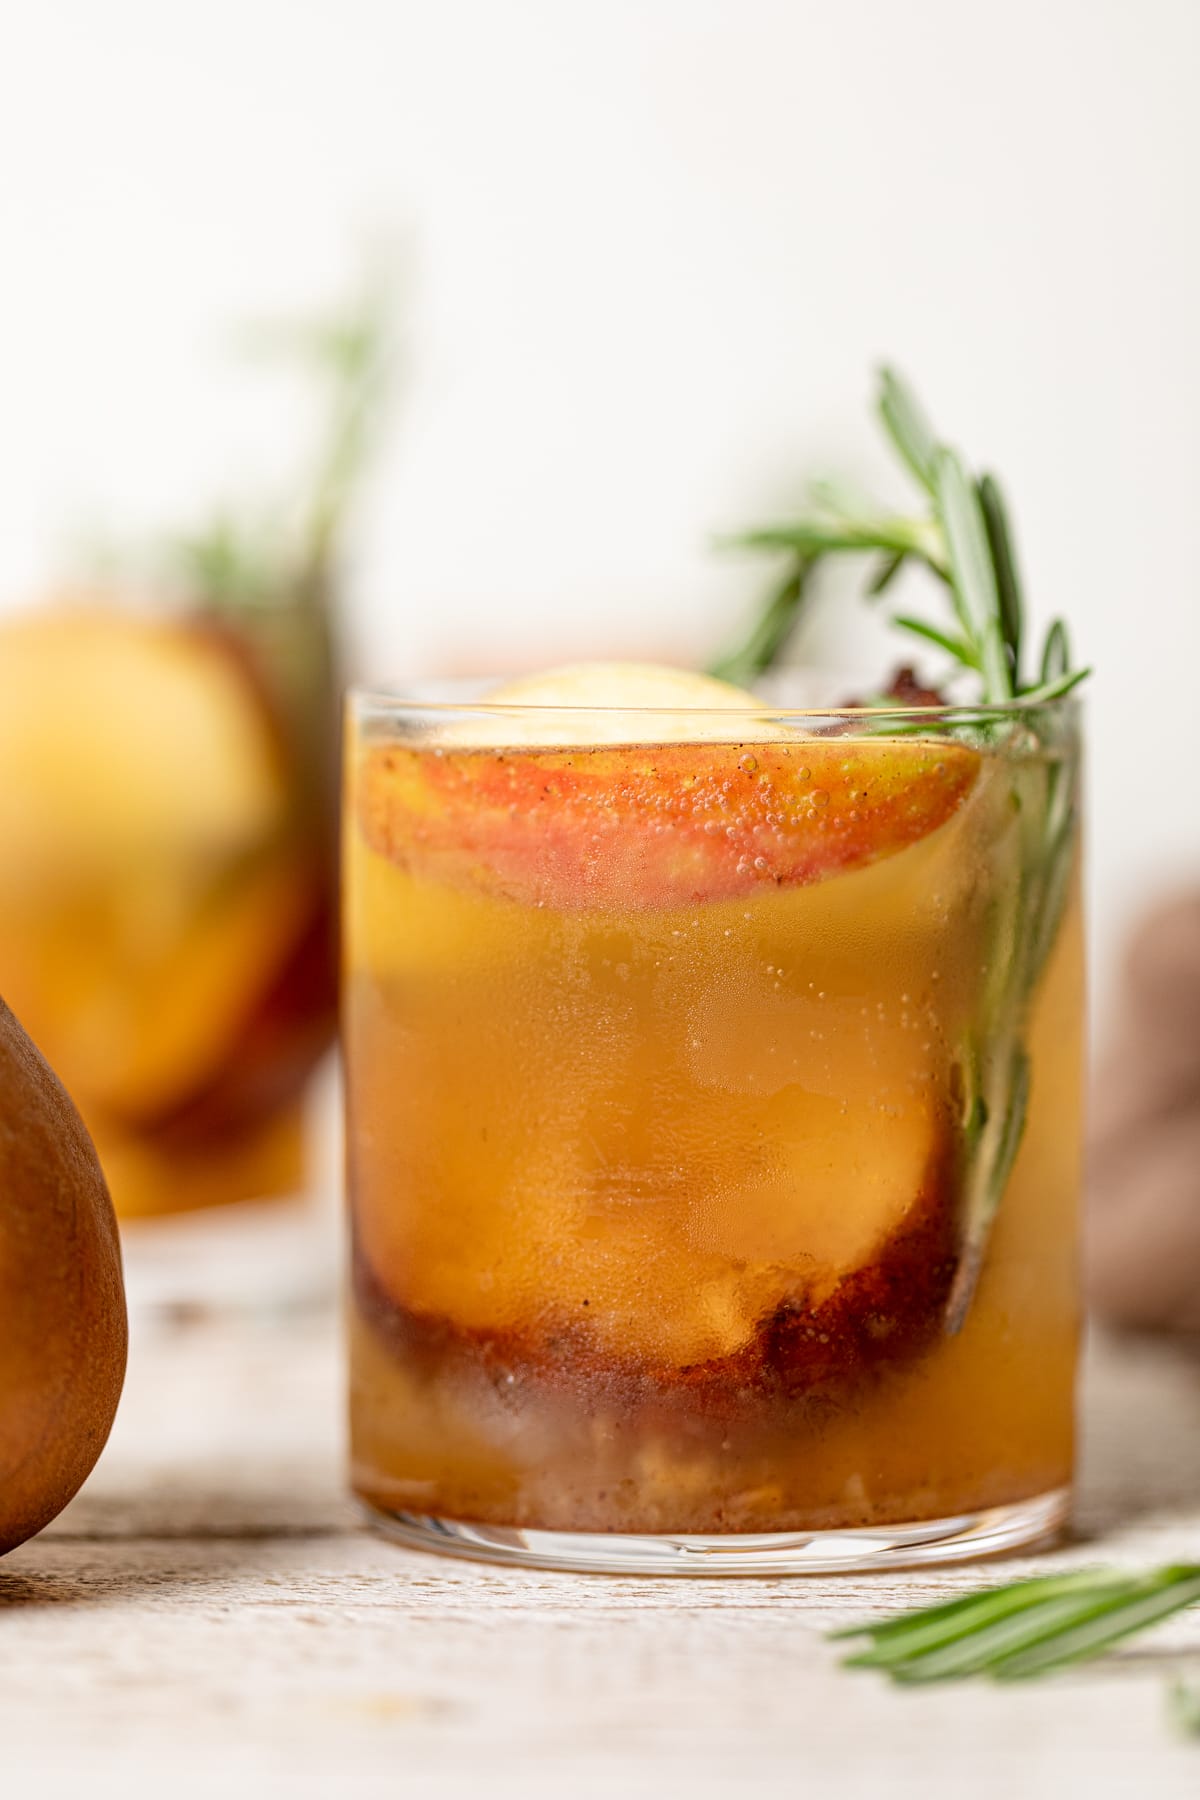 Roasted Apple Pear Mocktail in a small glass stuffed with apple slices and a sprig of rosemary